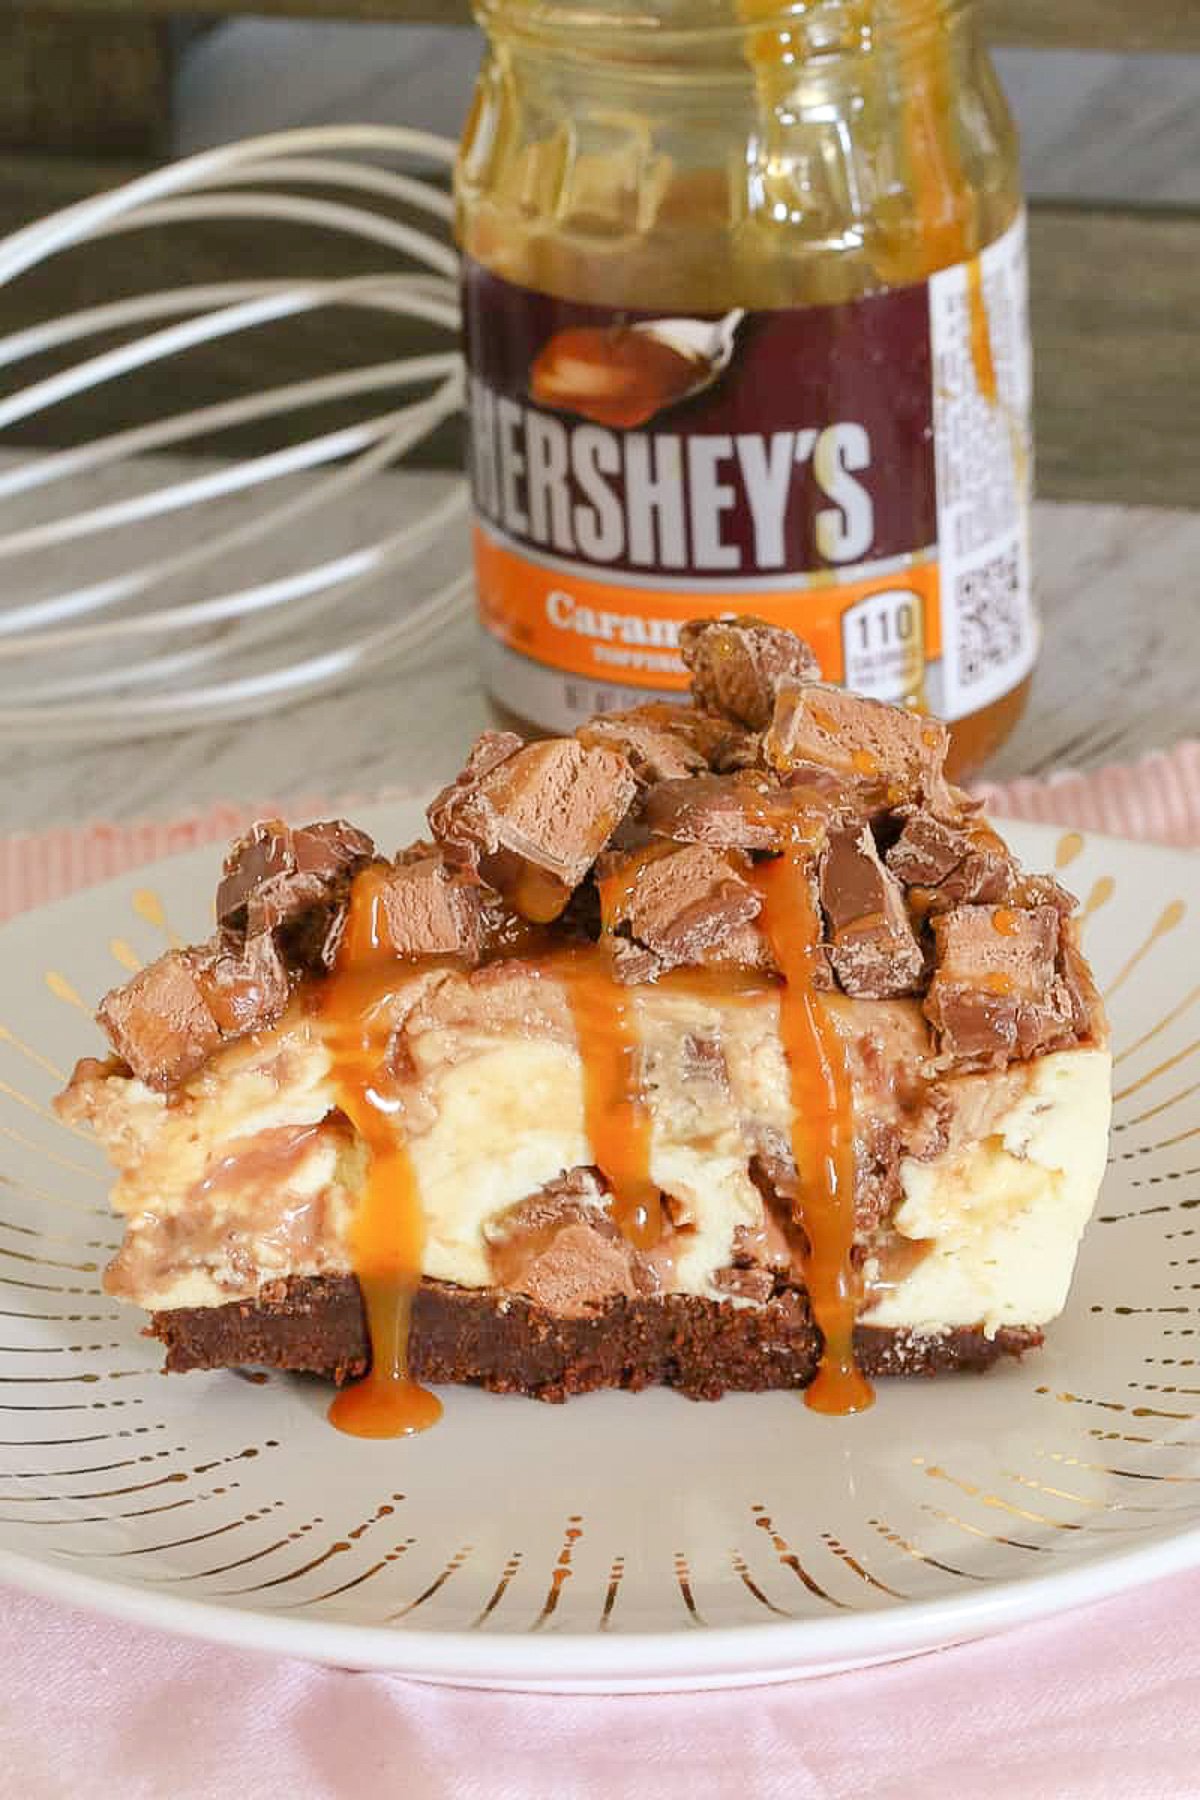 A piece of Mars Bar cheesecake in front of a jar of Herseys's caramel sauce.